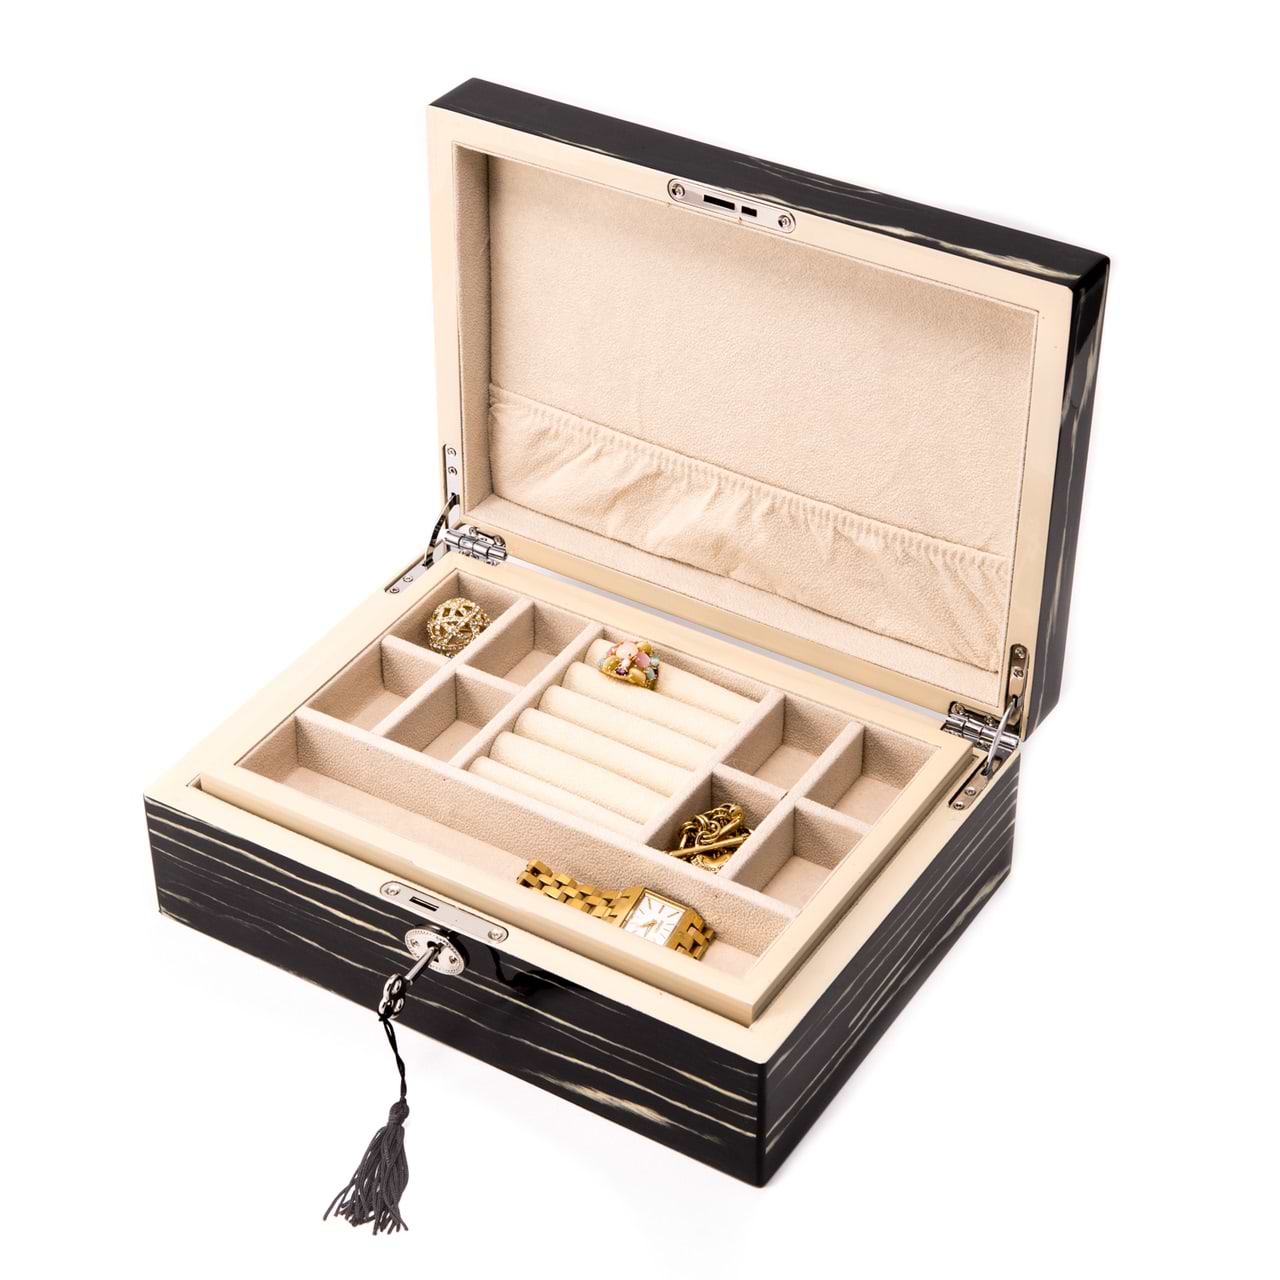 Lacquered Wood Jewelry Box with Valet Tray and Key Lock